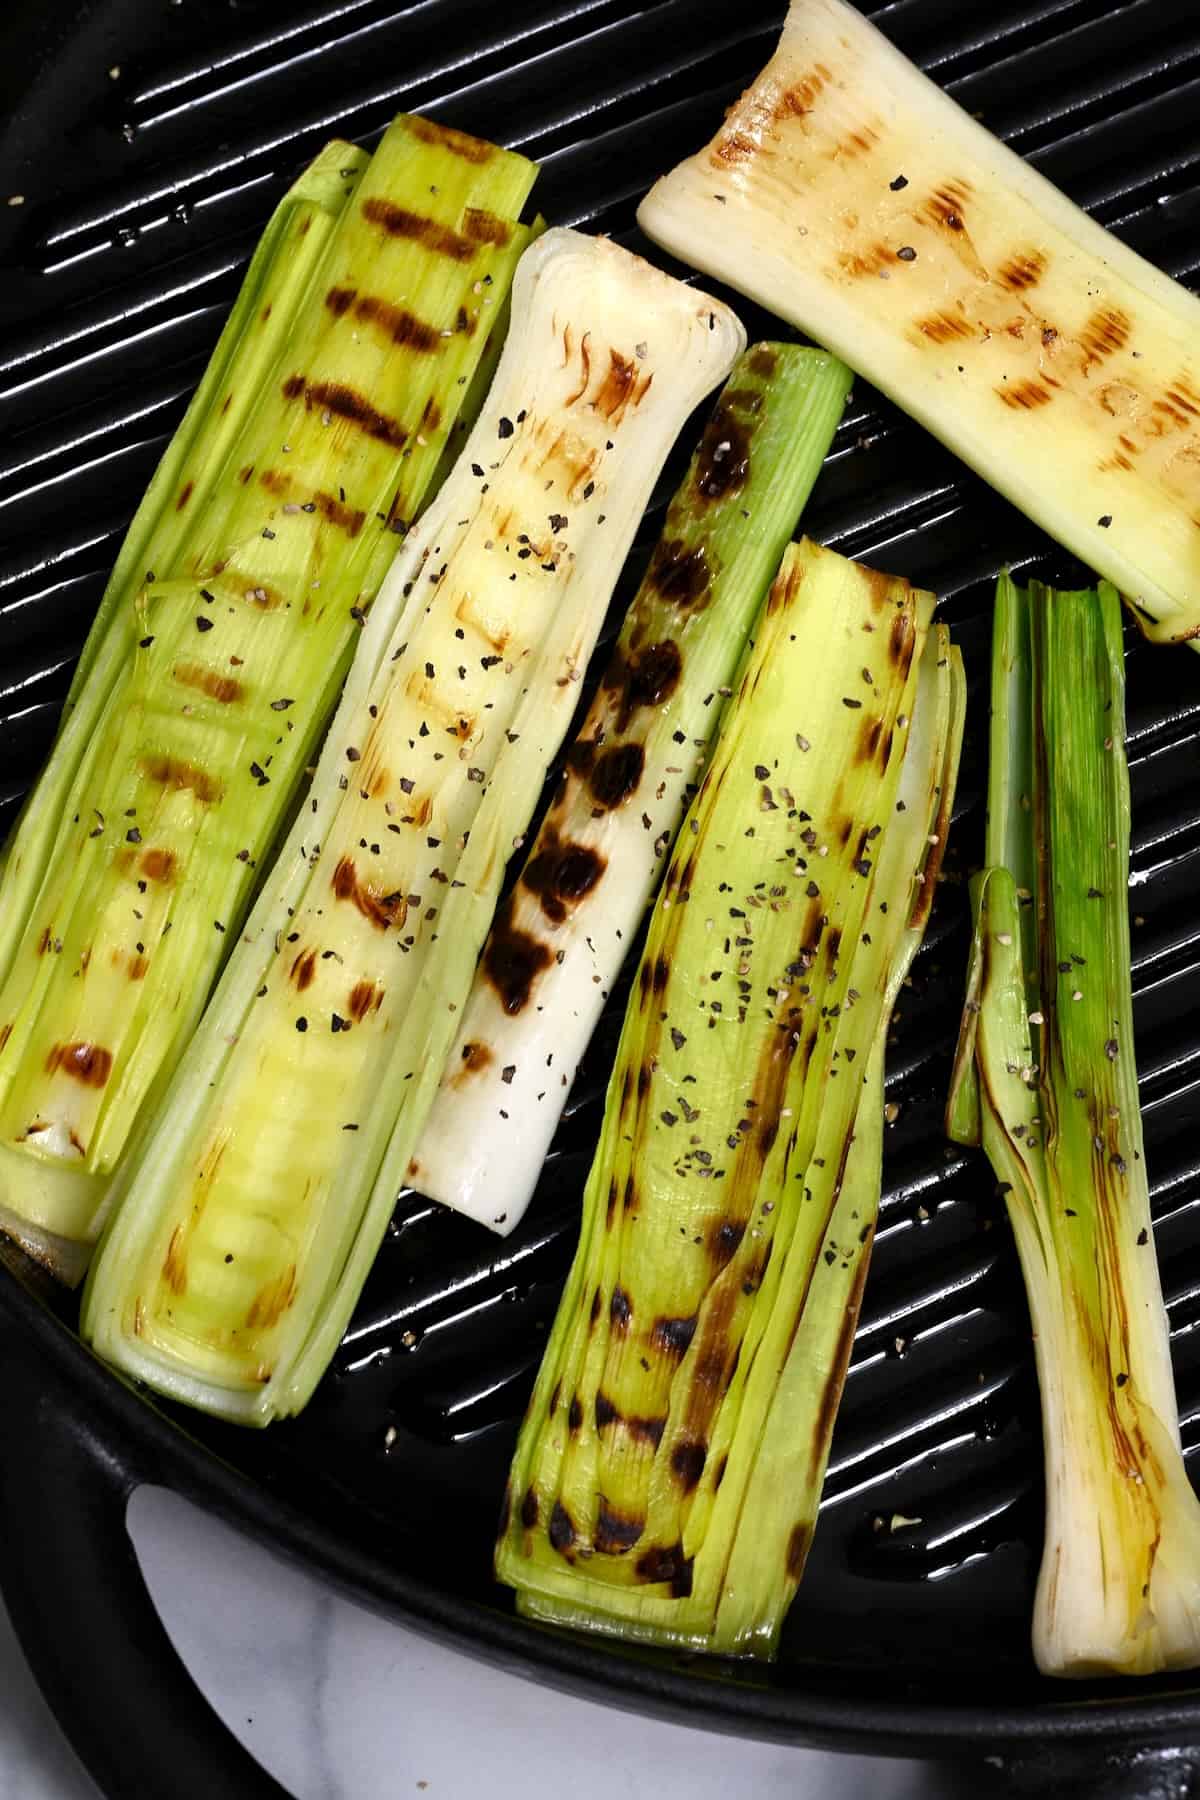 Leeks cooked on a griddle